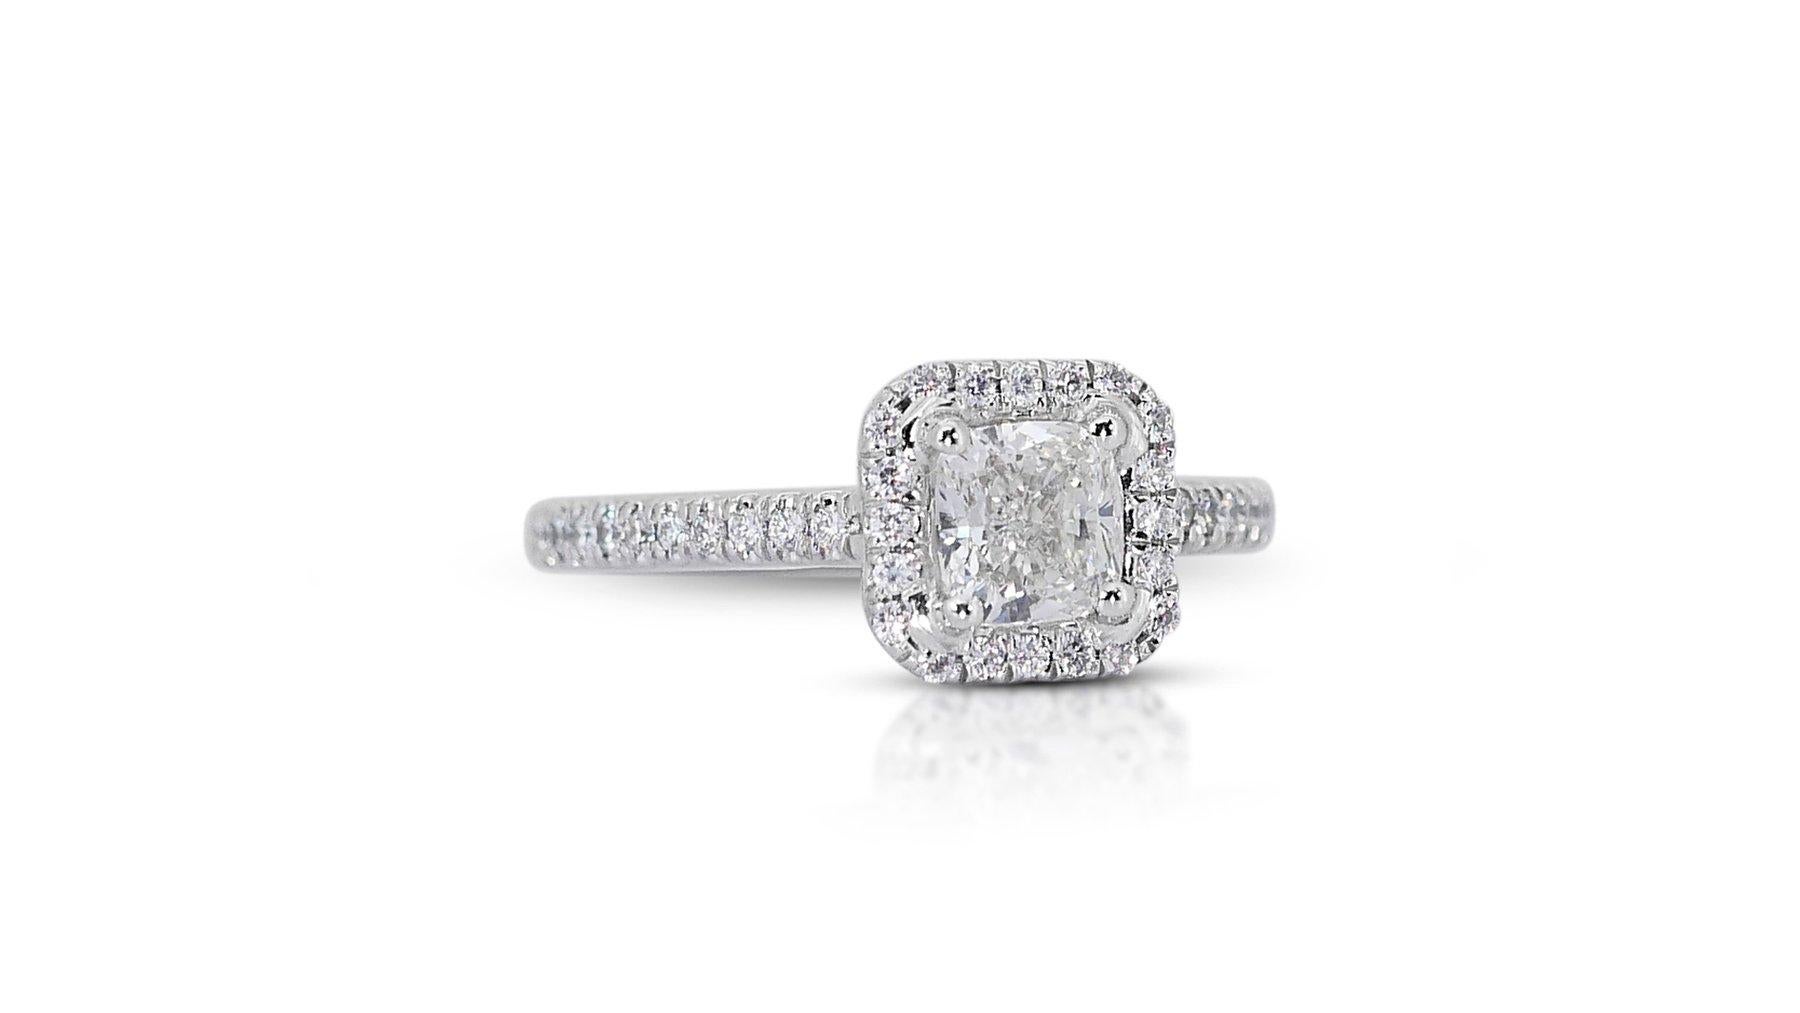 Exquisite 18K White Gold Natural Diamond Halo Ring w/1.80 Carat - GIA Certified

Elevate your style and make a statement of refined elegance with this exquisite diamond halo ring. At its core, this exquisite ring features a resplendent 1.20-carat